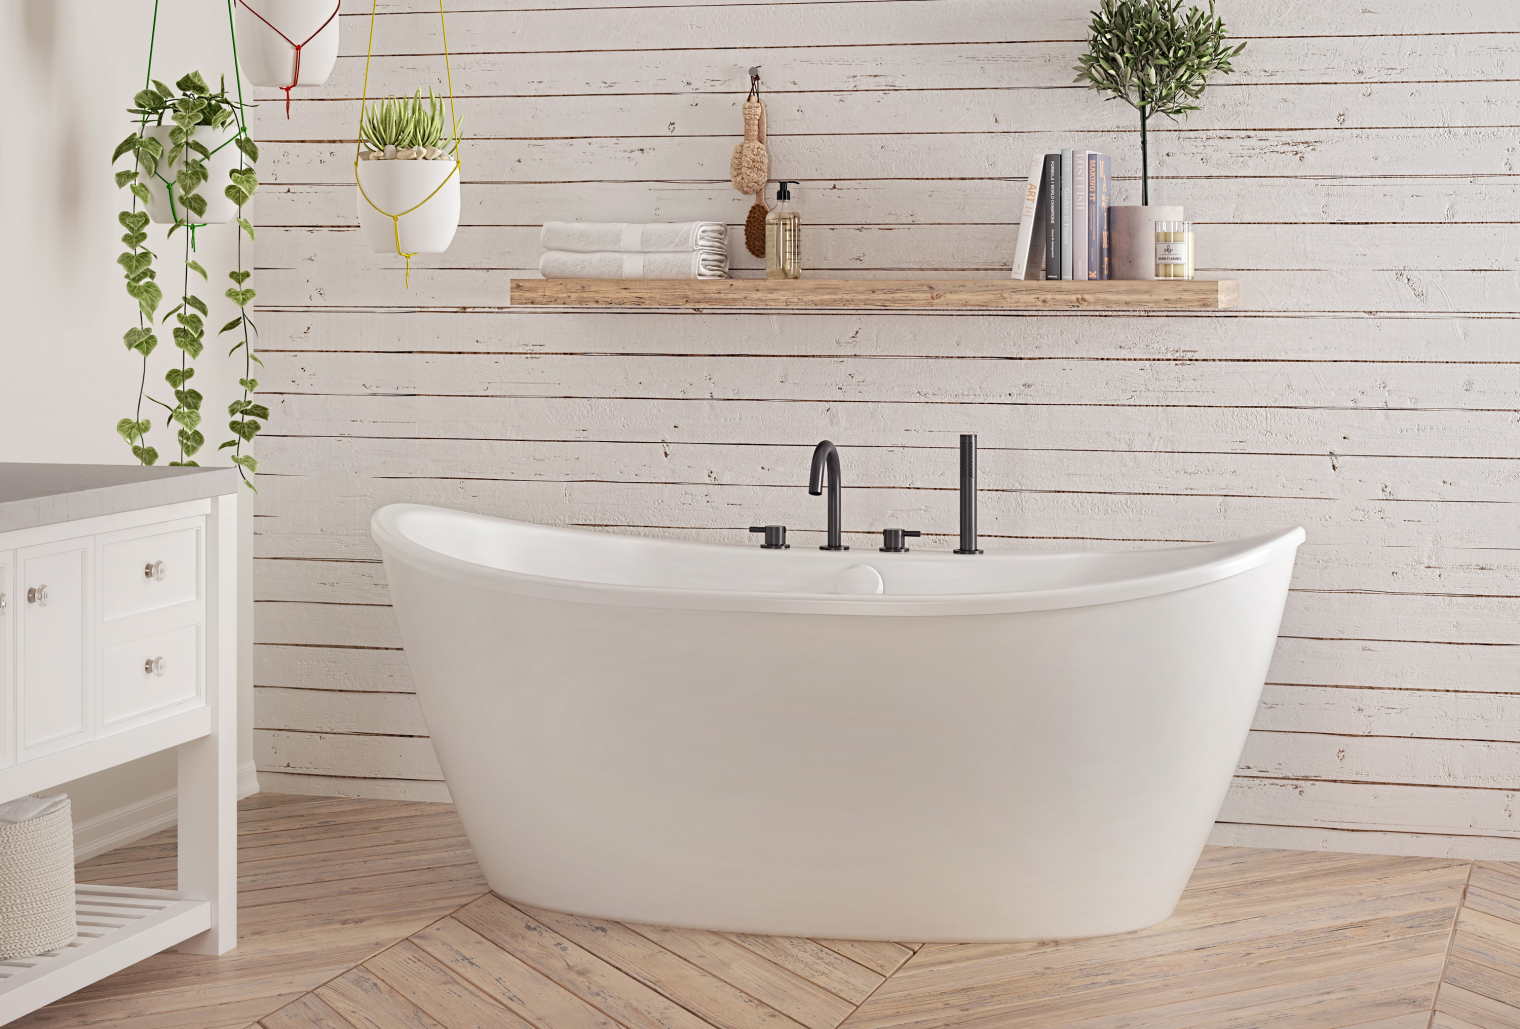 Free standing oval shaped off white tub in a wooden decorative bathroom.